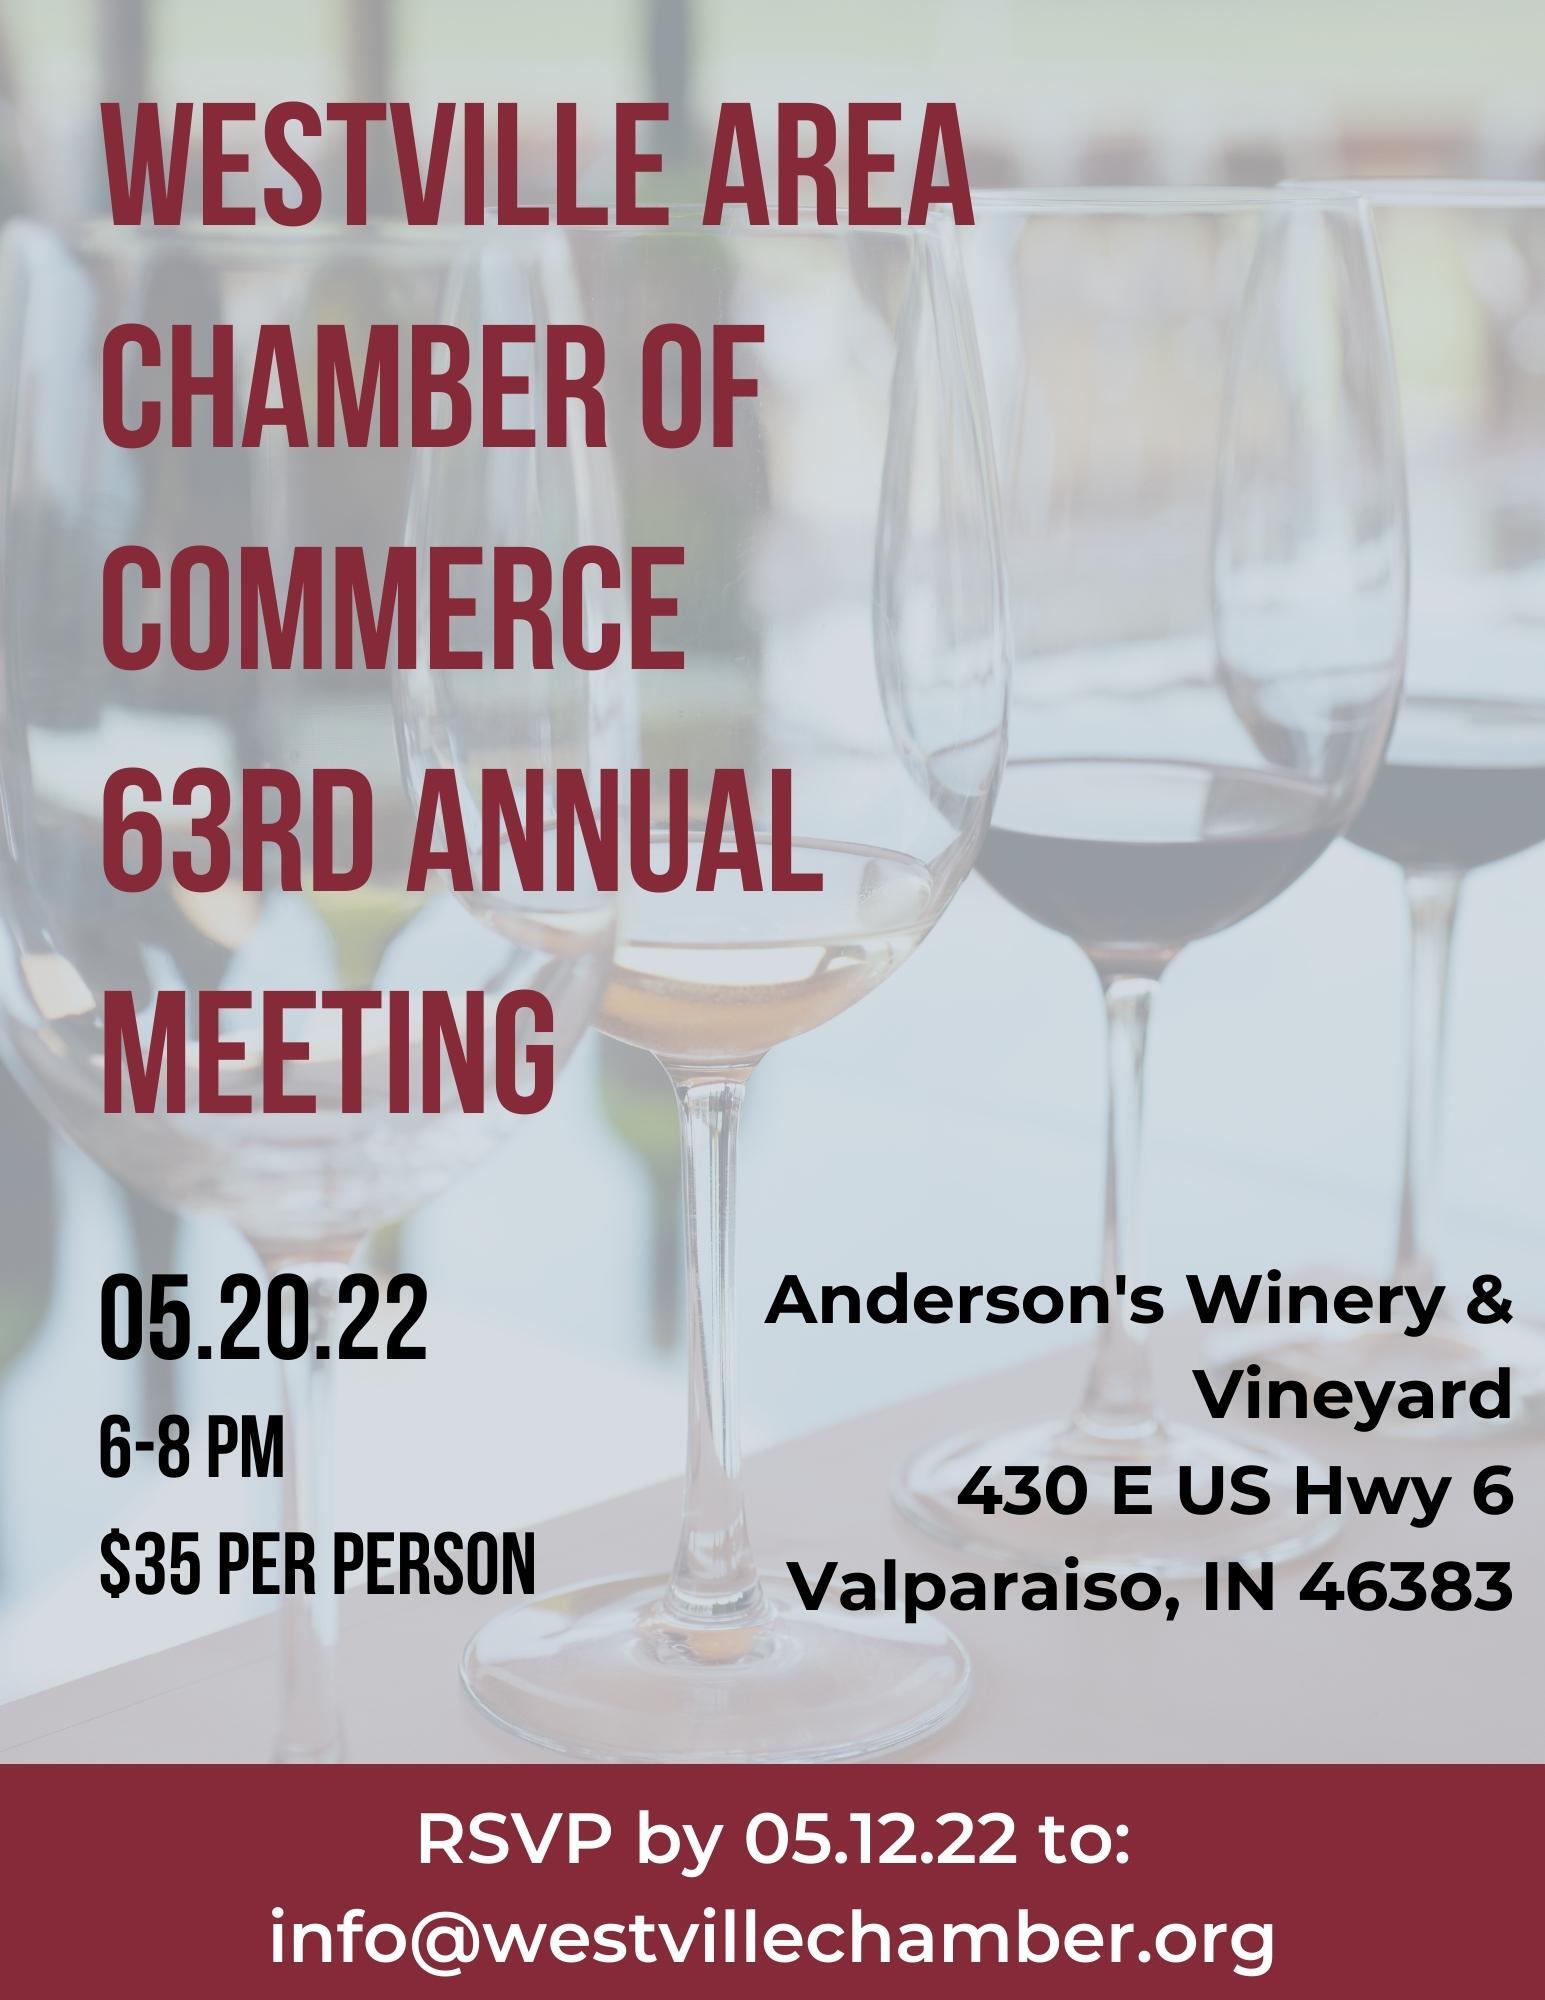 Westville Area Chamber of Commerce 63rd Annual Meeting Event